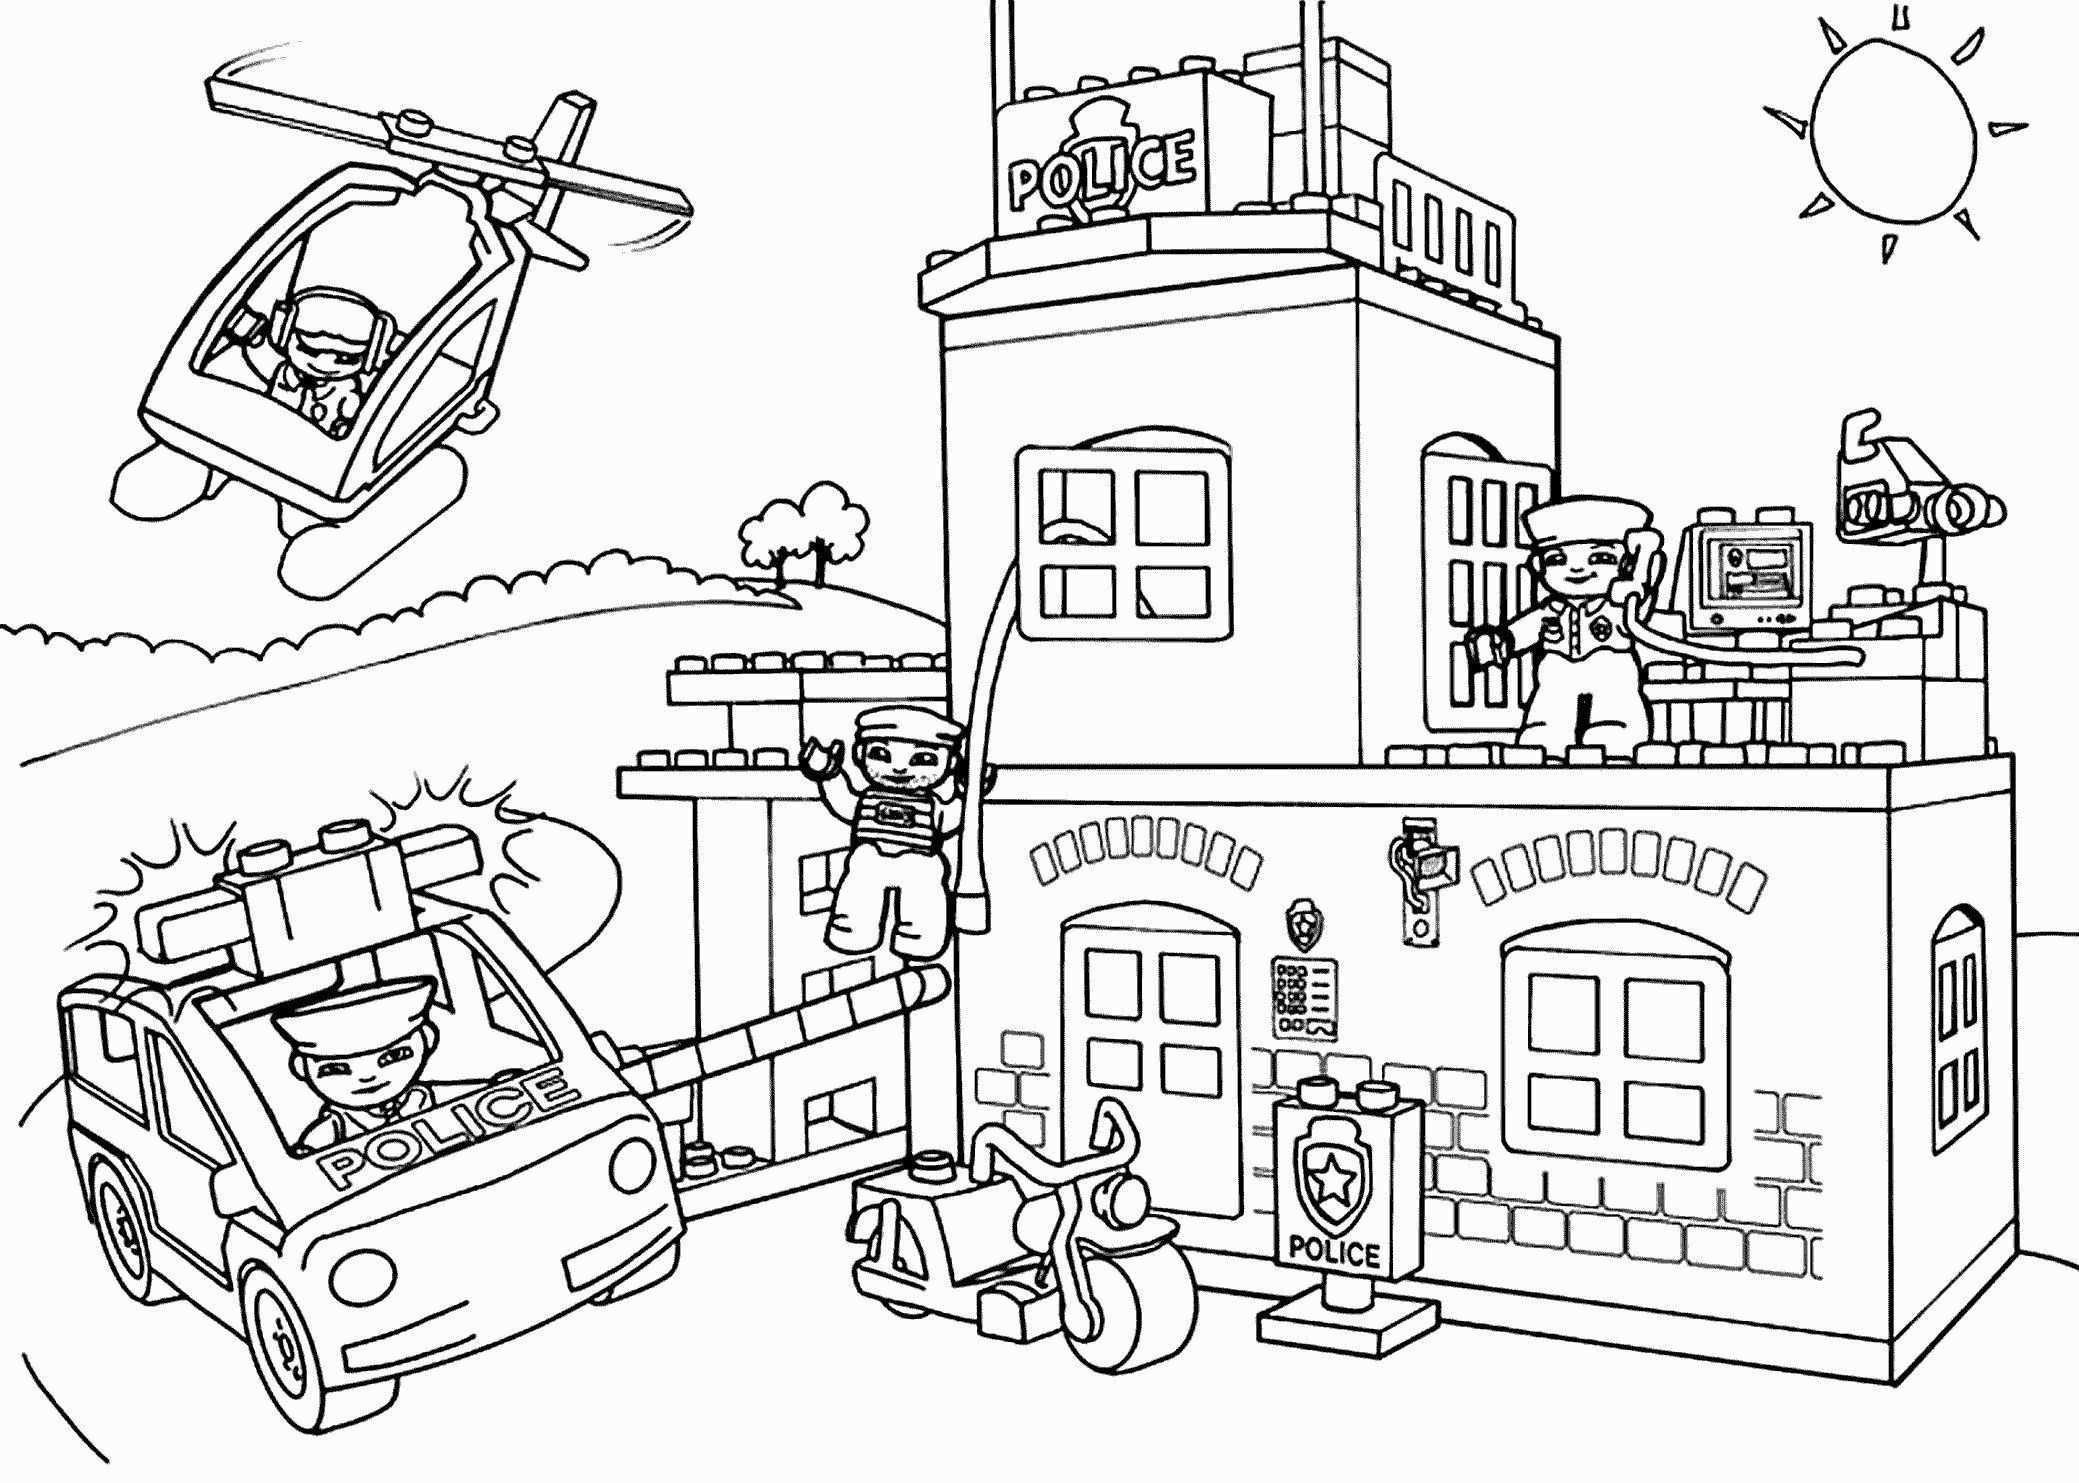 Lego City Coloring Pages Elegant Lego City Coloring Pages Lego Coloring Pages Lego Co